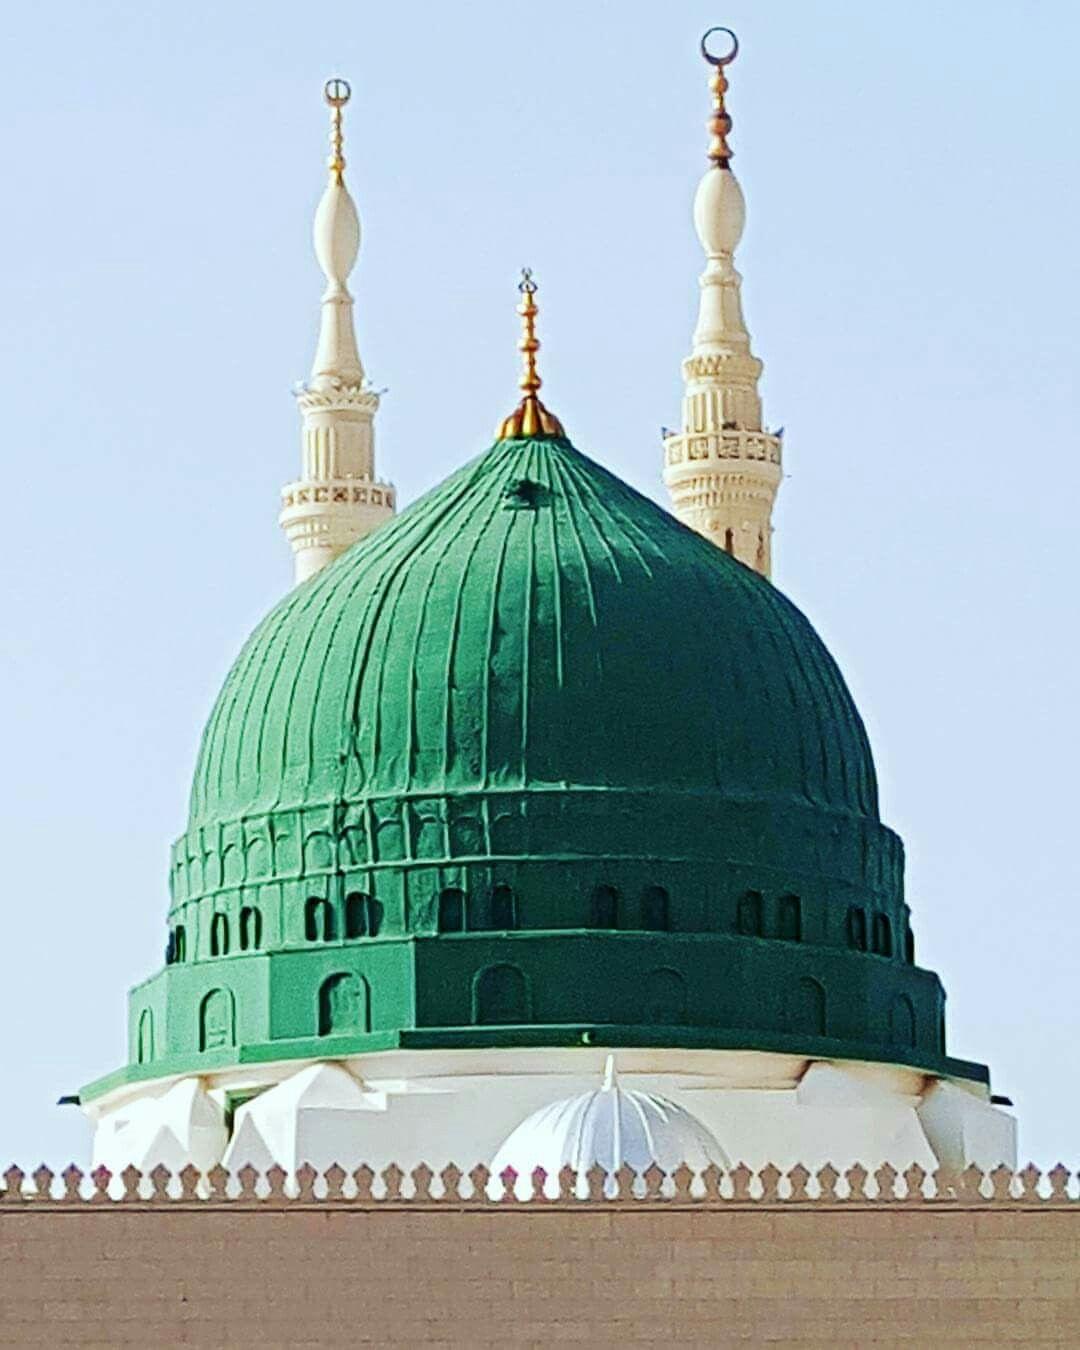 The Green Dome Overview